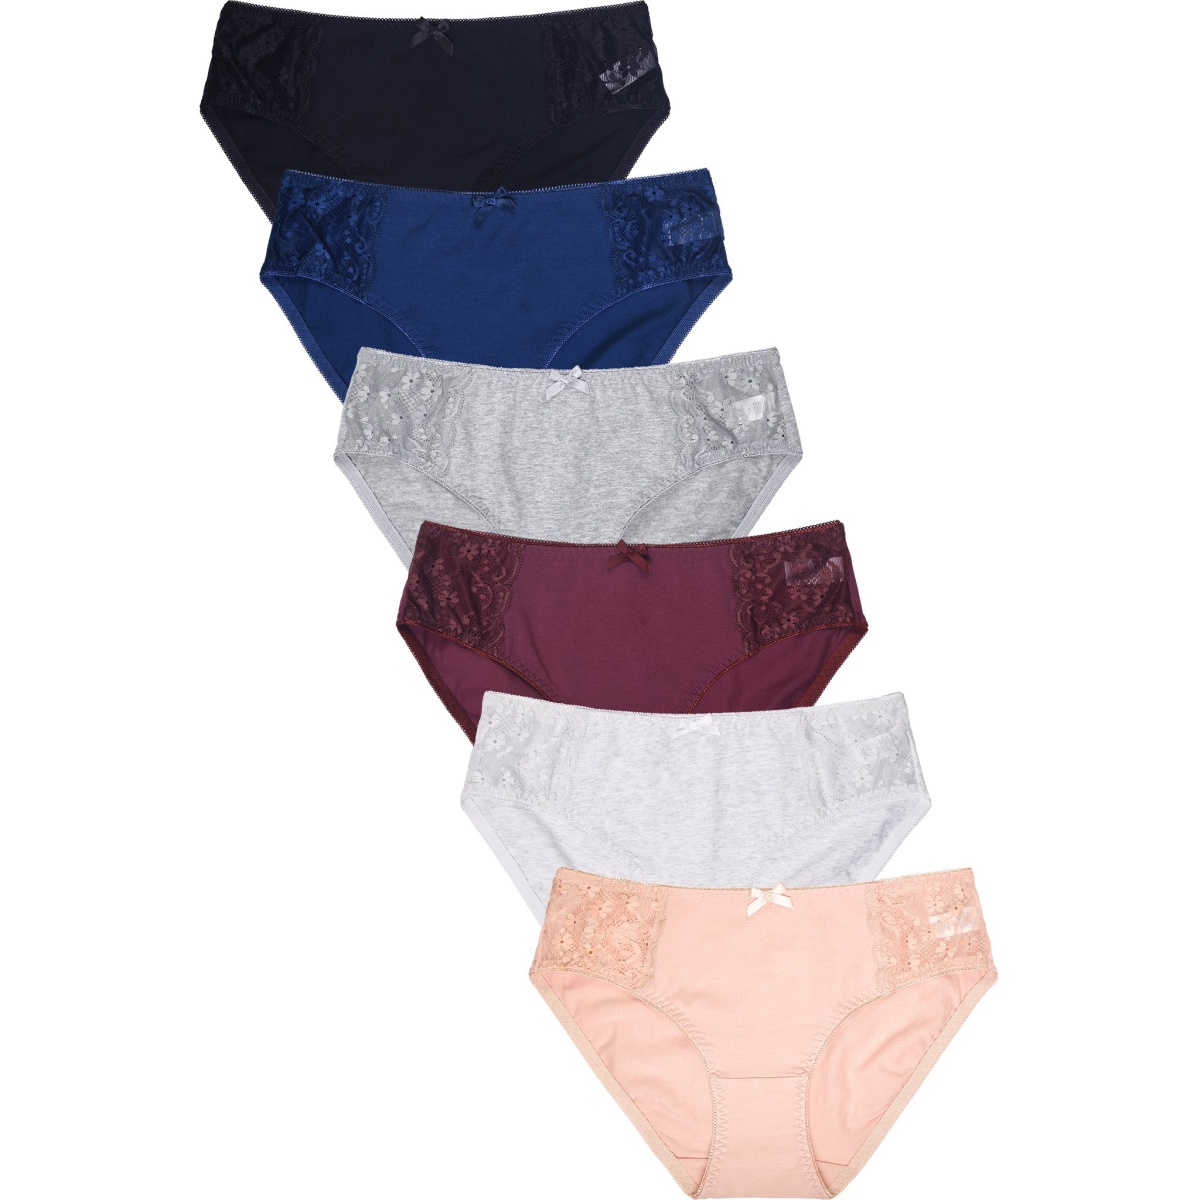 Picture of 247 Frenzy 247-LP1426CK-XL Sofra Womens Essentials Cotton Stretch Bikini Panty Underwear - Assorted Color - Extra Large - Pack of 6